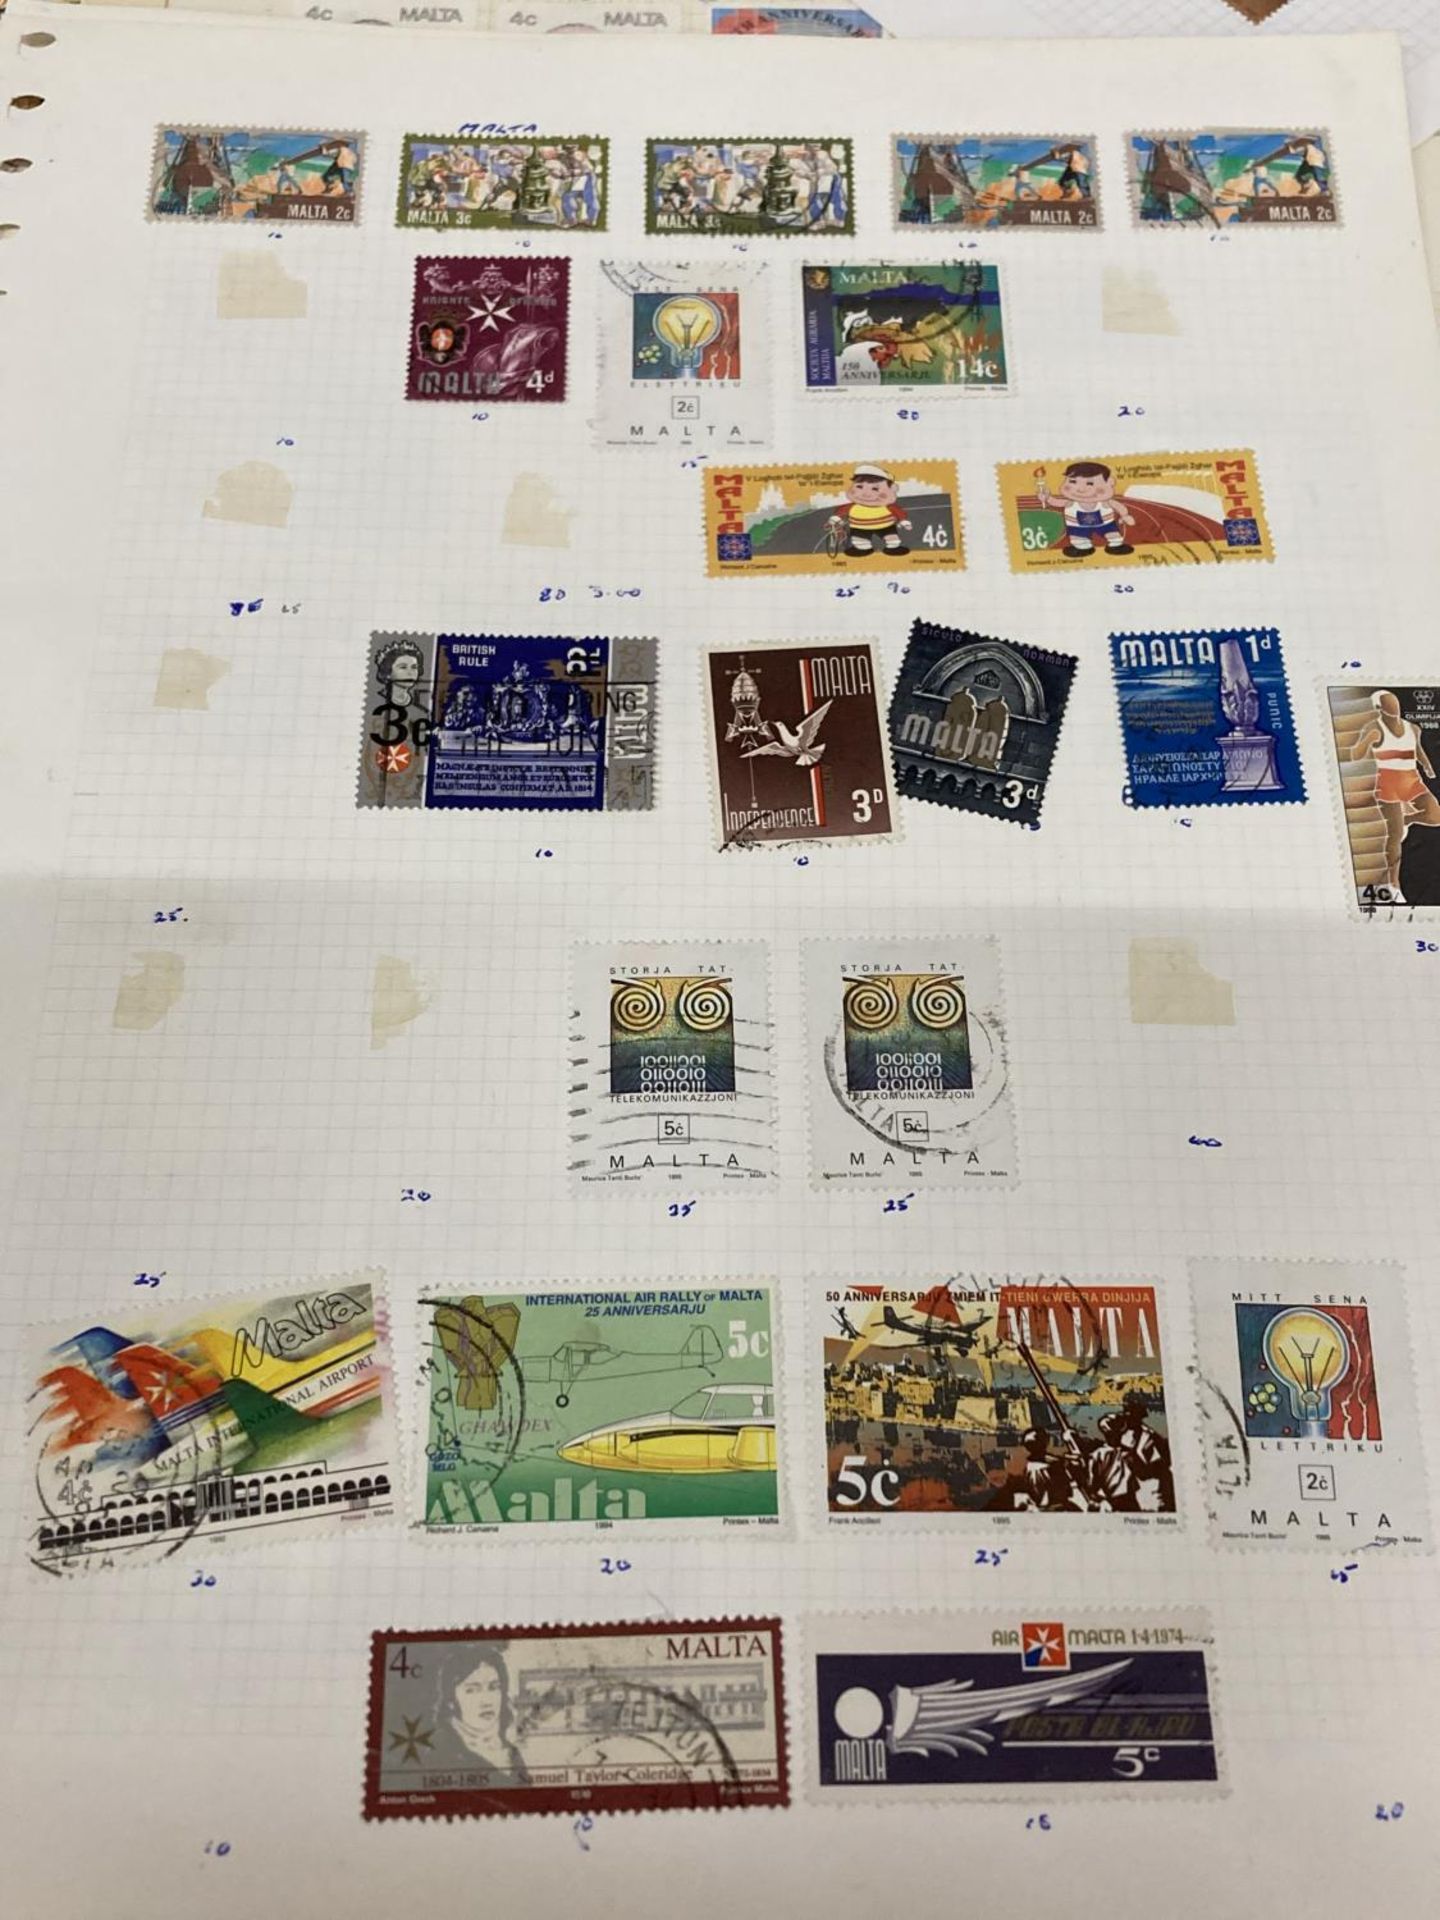 TEN PLUS SHEETS CONTAINING STAMPS FROM MALTA - Image 2 of 6